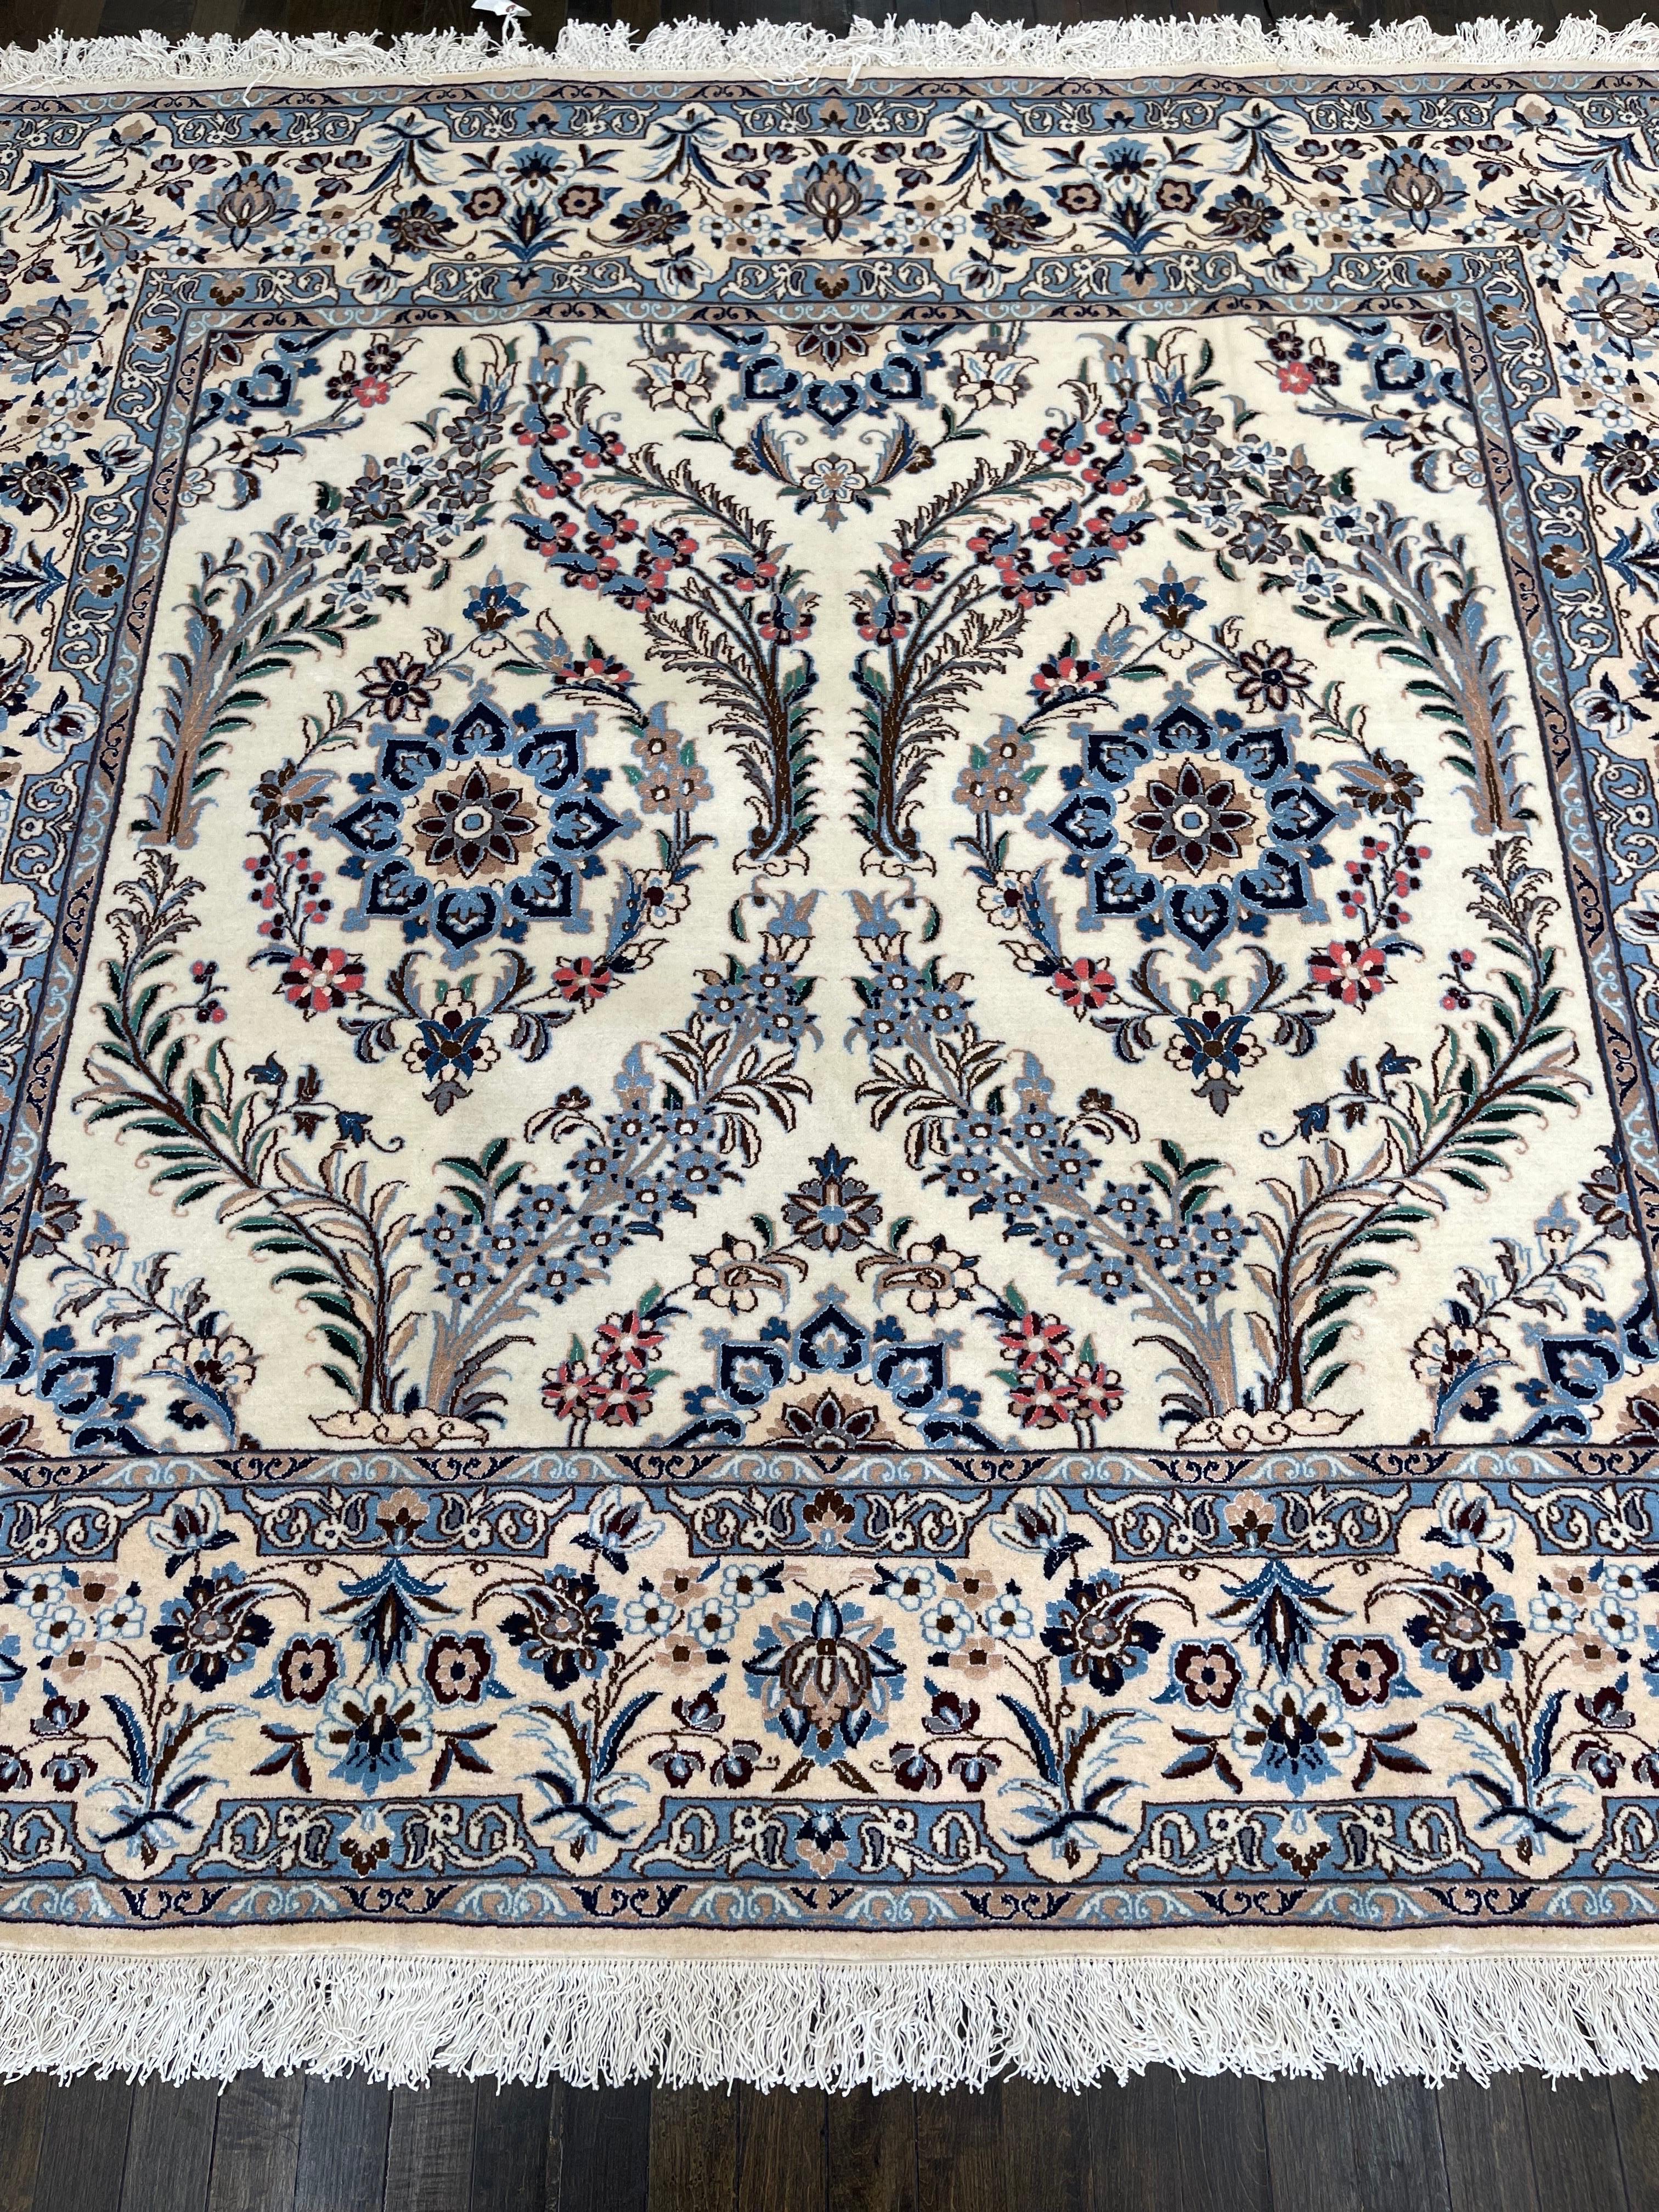 Finely woven Persian rug featuring floral, curvilinear designs on an ivory field framed by an ivory border decorated with flowers and bottehs. The impressive drawing of this carpet is a testimony of how fine classic persian rugs are made. The